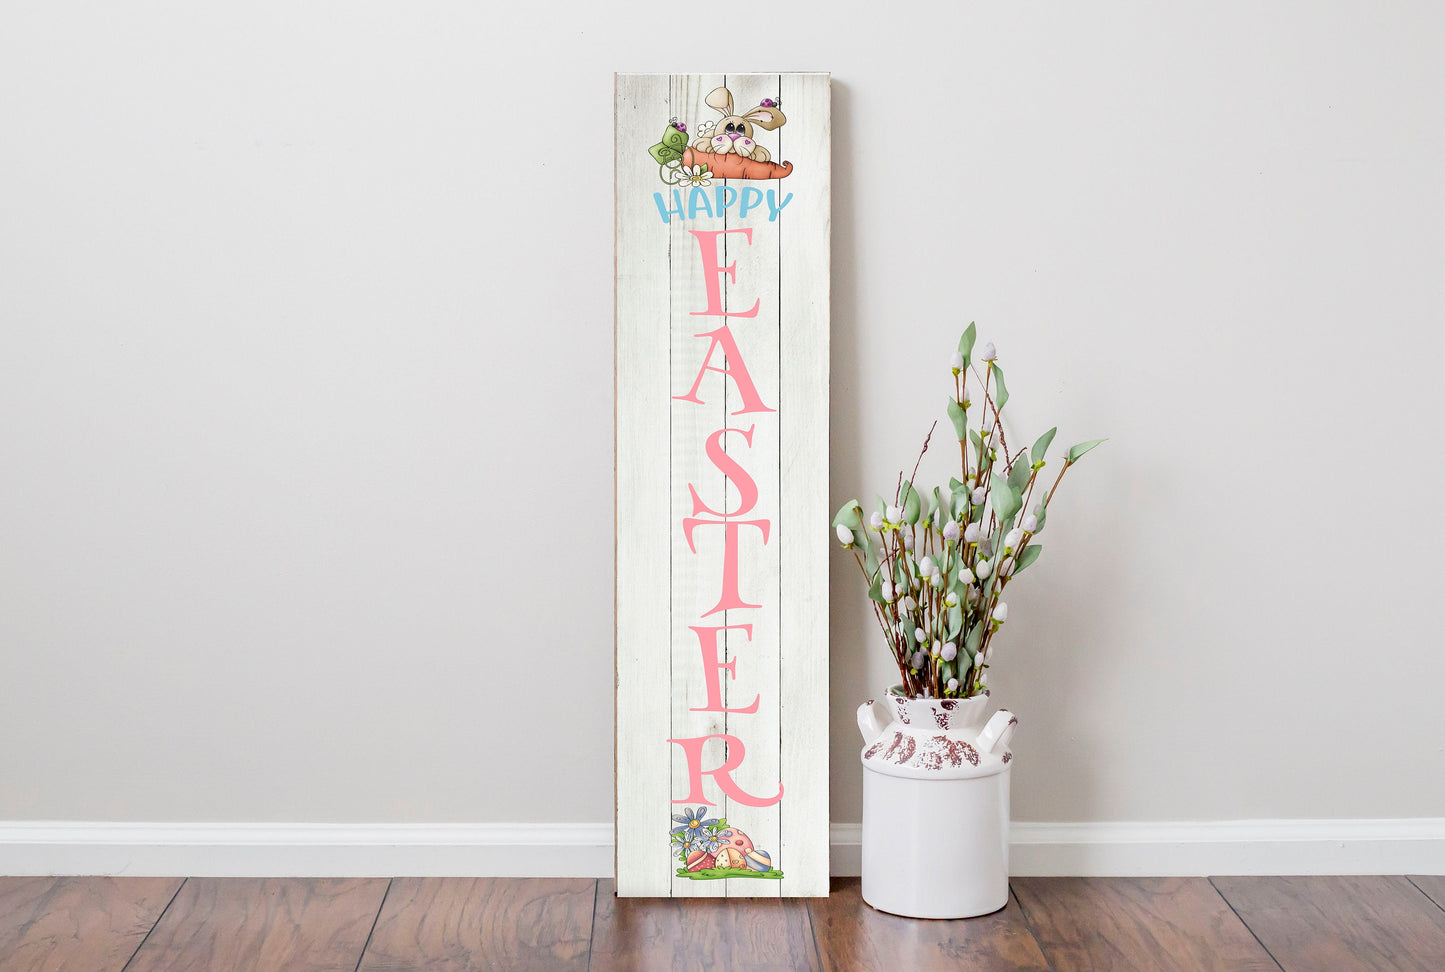 24 Inch (2 Foot Tall) Happy Easter Rabbit with Carrot Vertical Wood Print Sign